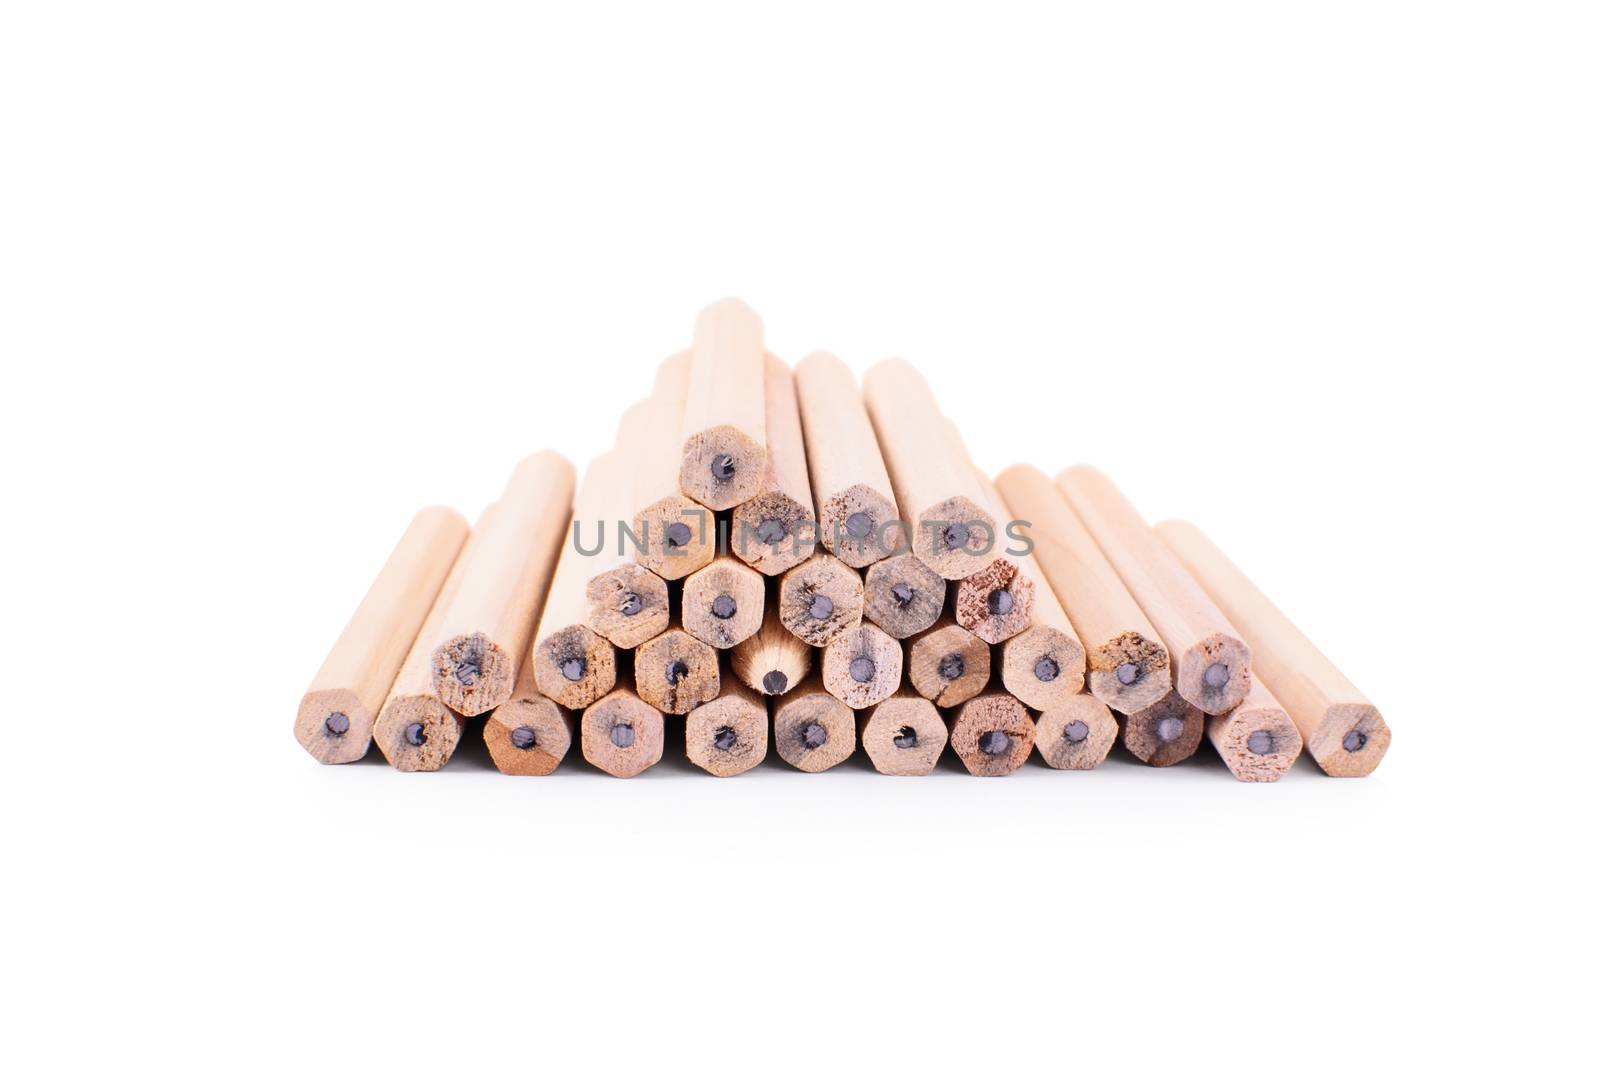 Pencils stacked on top of each other by Mendelex